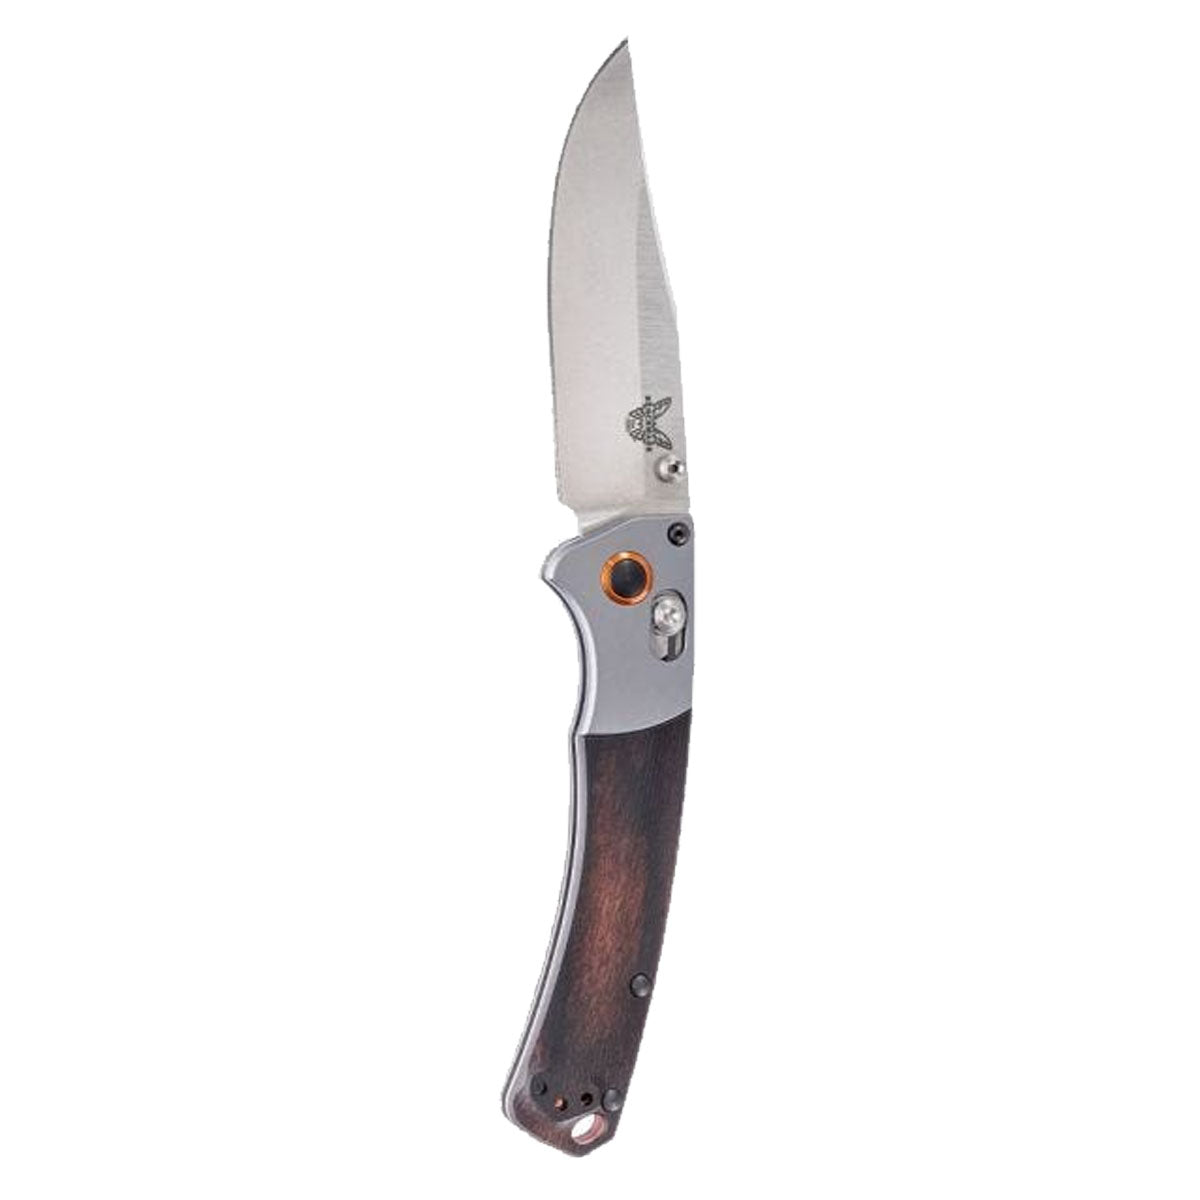 Benchmade Mini Crooked River in  by GOHUNT | Benchmade - GOHUNT Shop